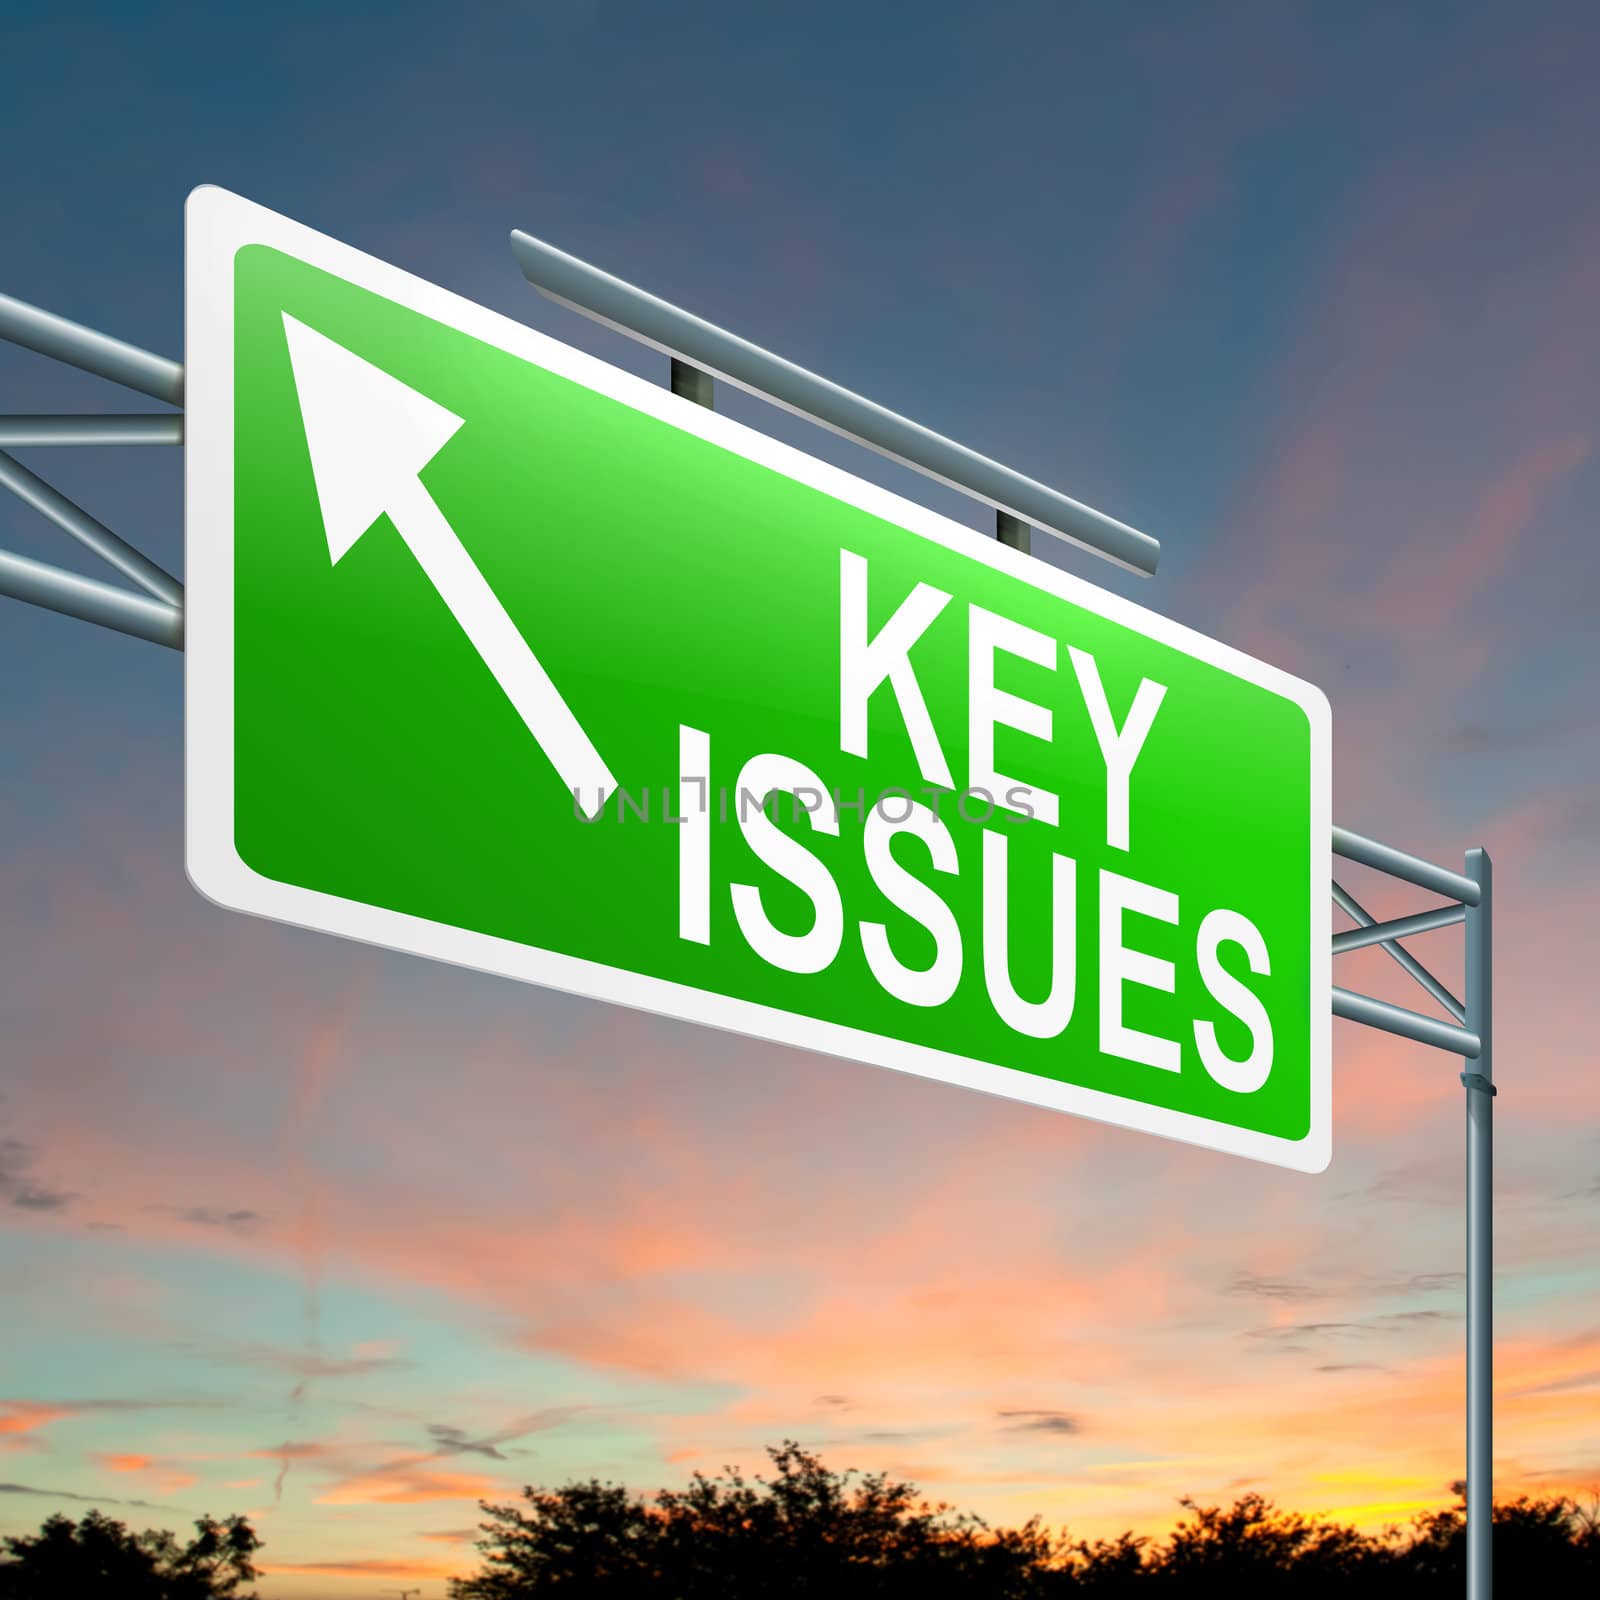 Illustration depicting a roadsign with a key issues concept. Sky background.